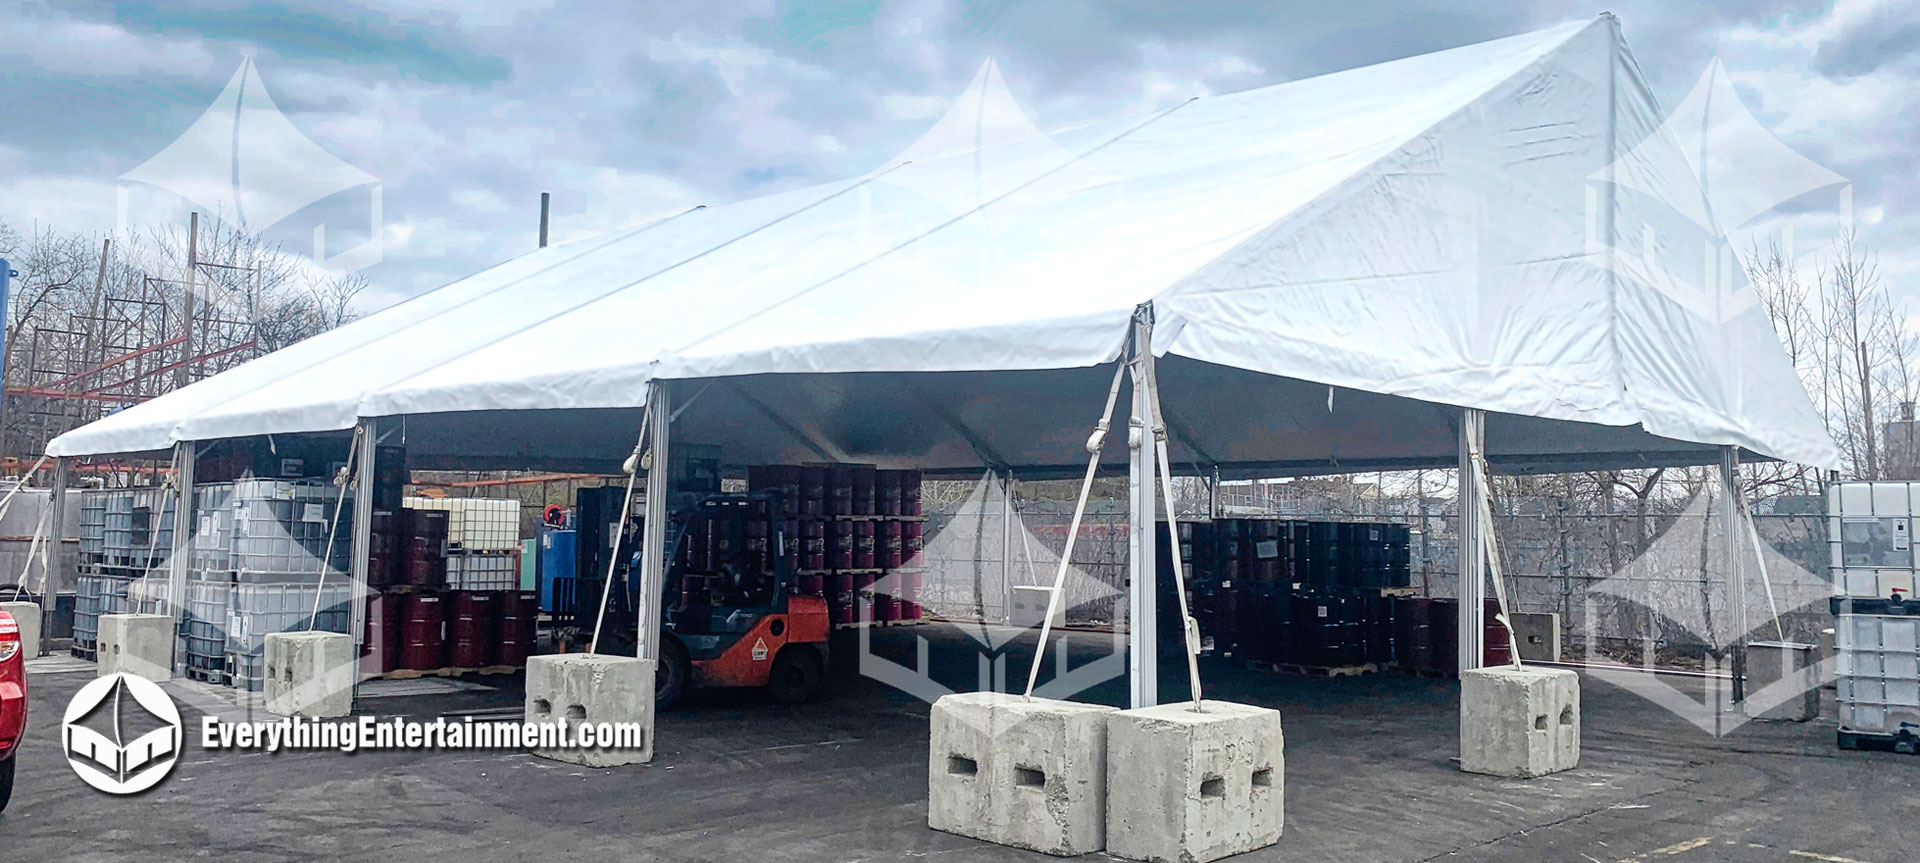 50x60 foot tent setup on asphalt to use as temporary warehouse space